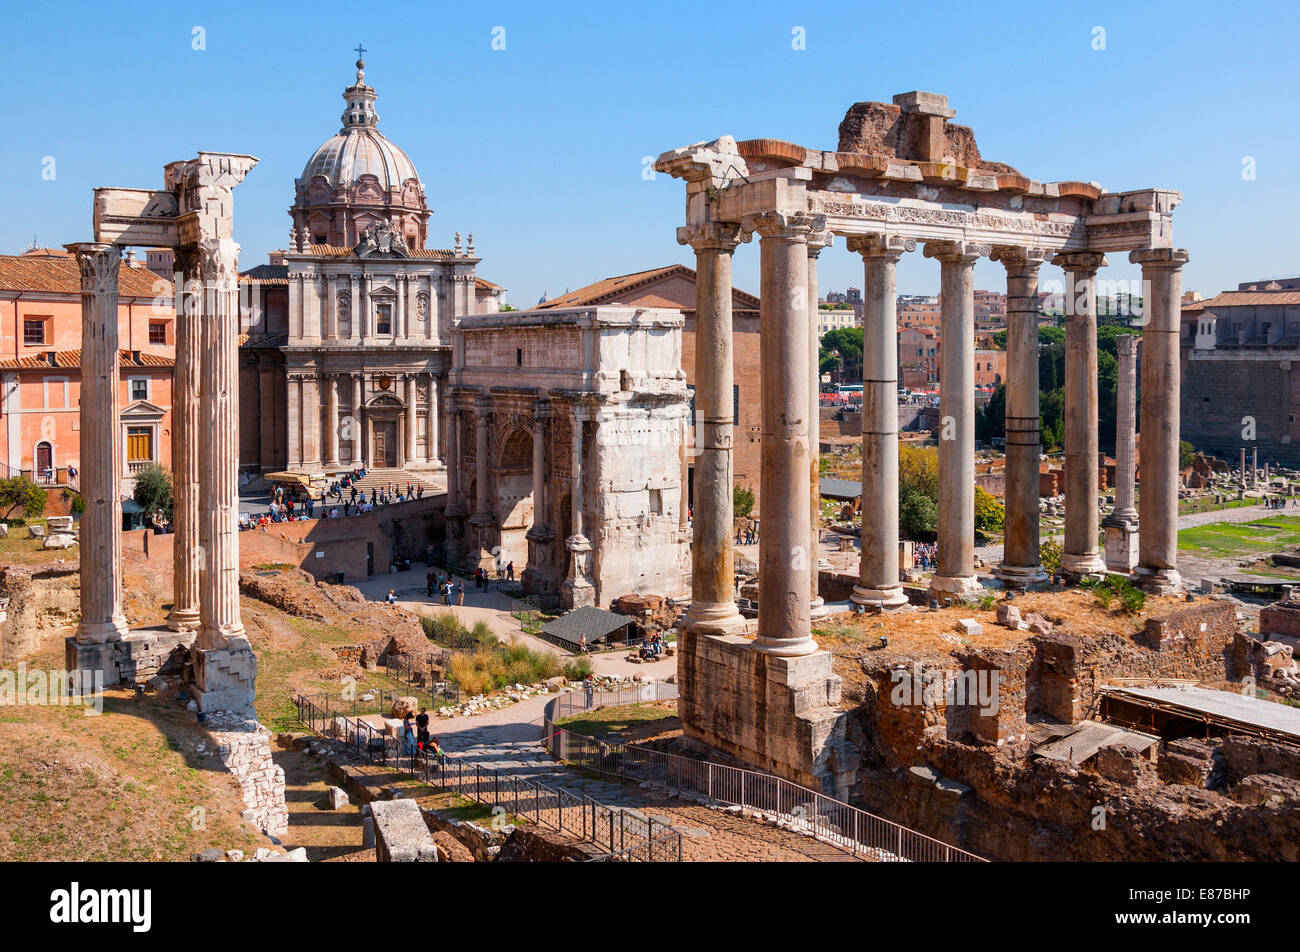 The_Roman_Forum_a_landmark_site_with_the